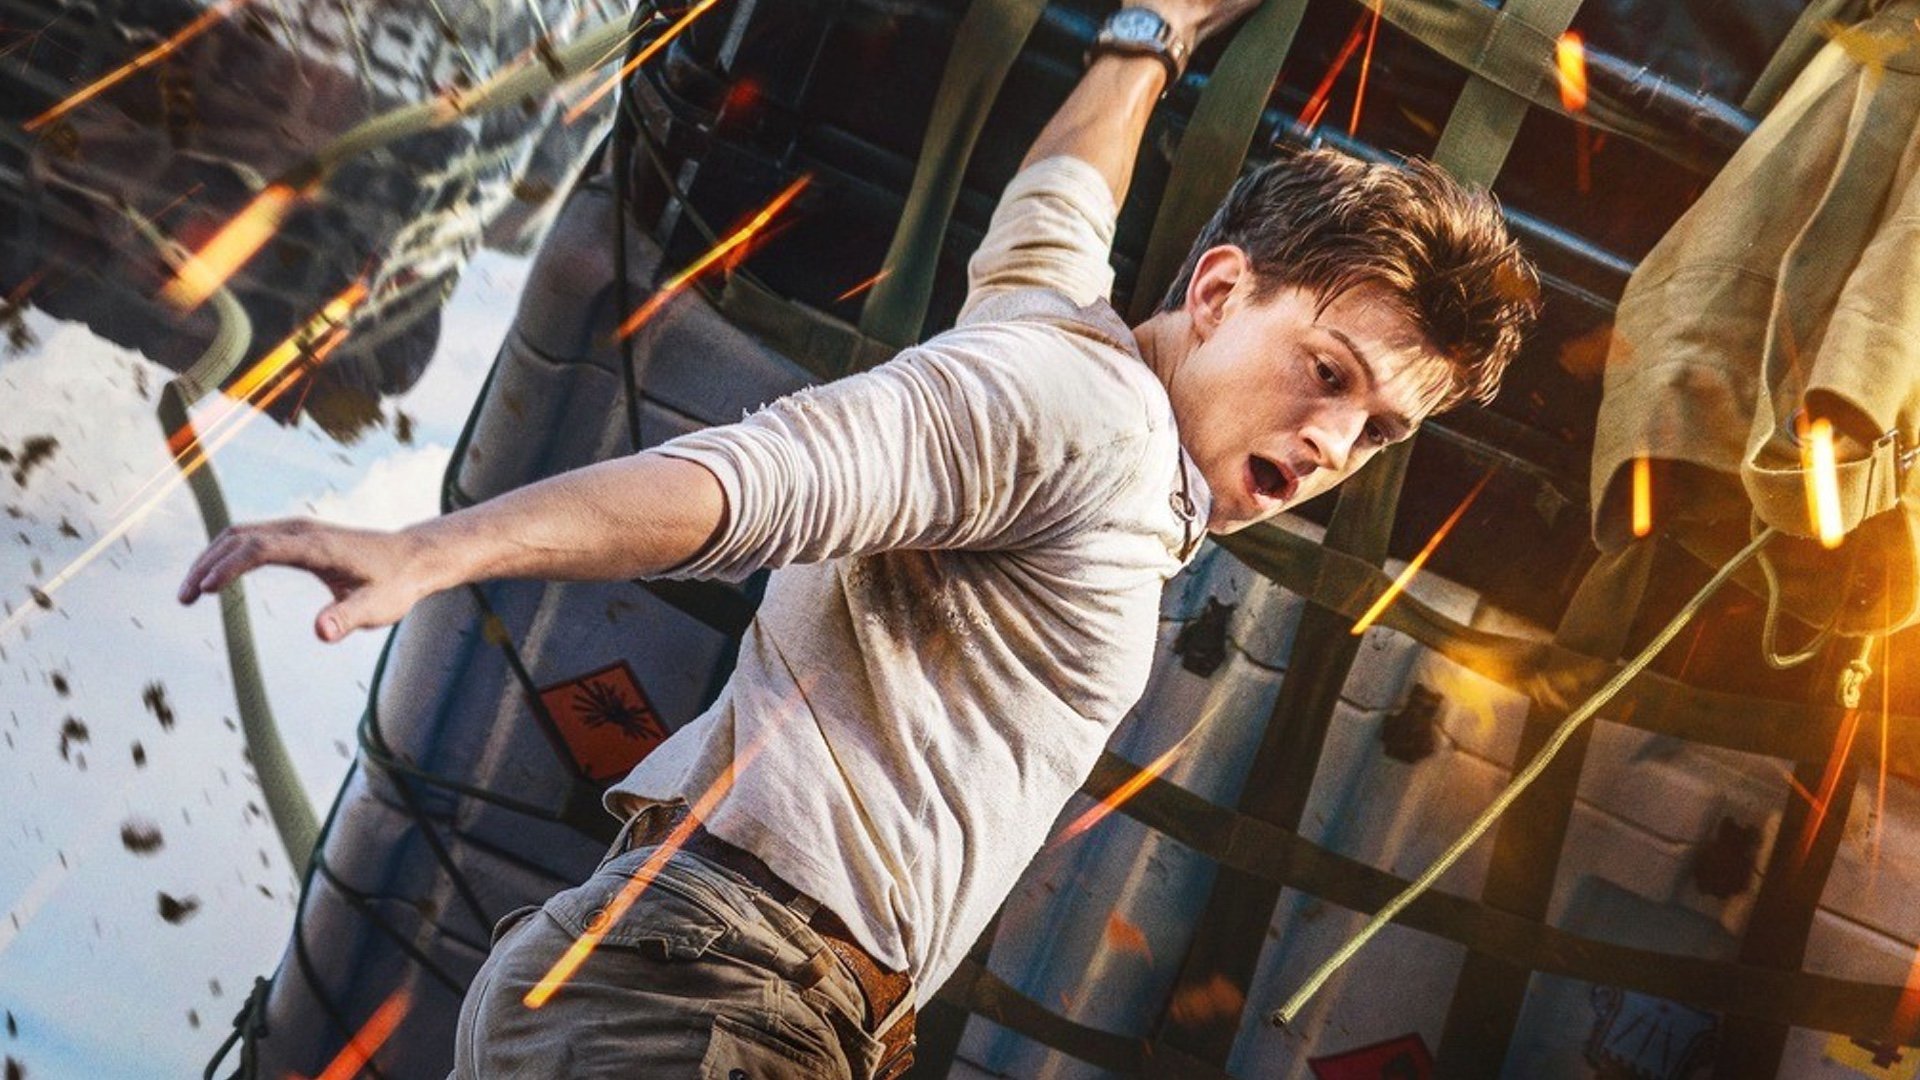 Uncharted movie sequel confirmed by Mark Wahlberg